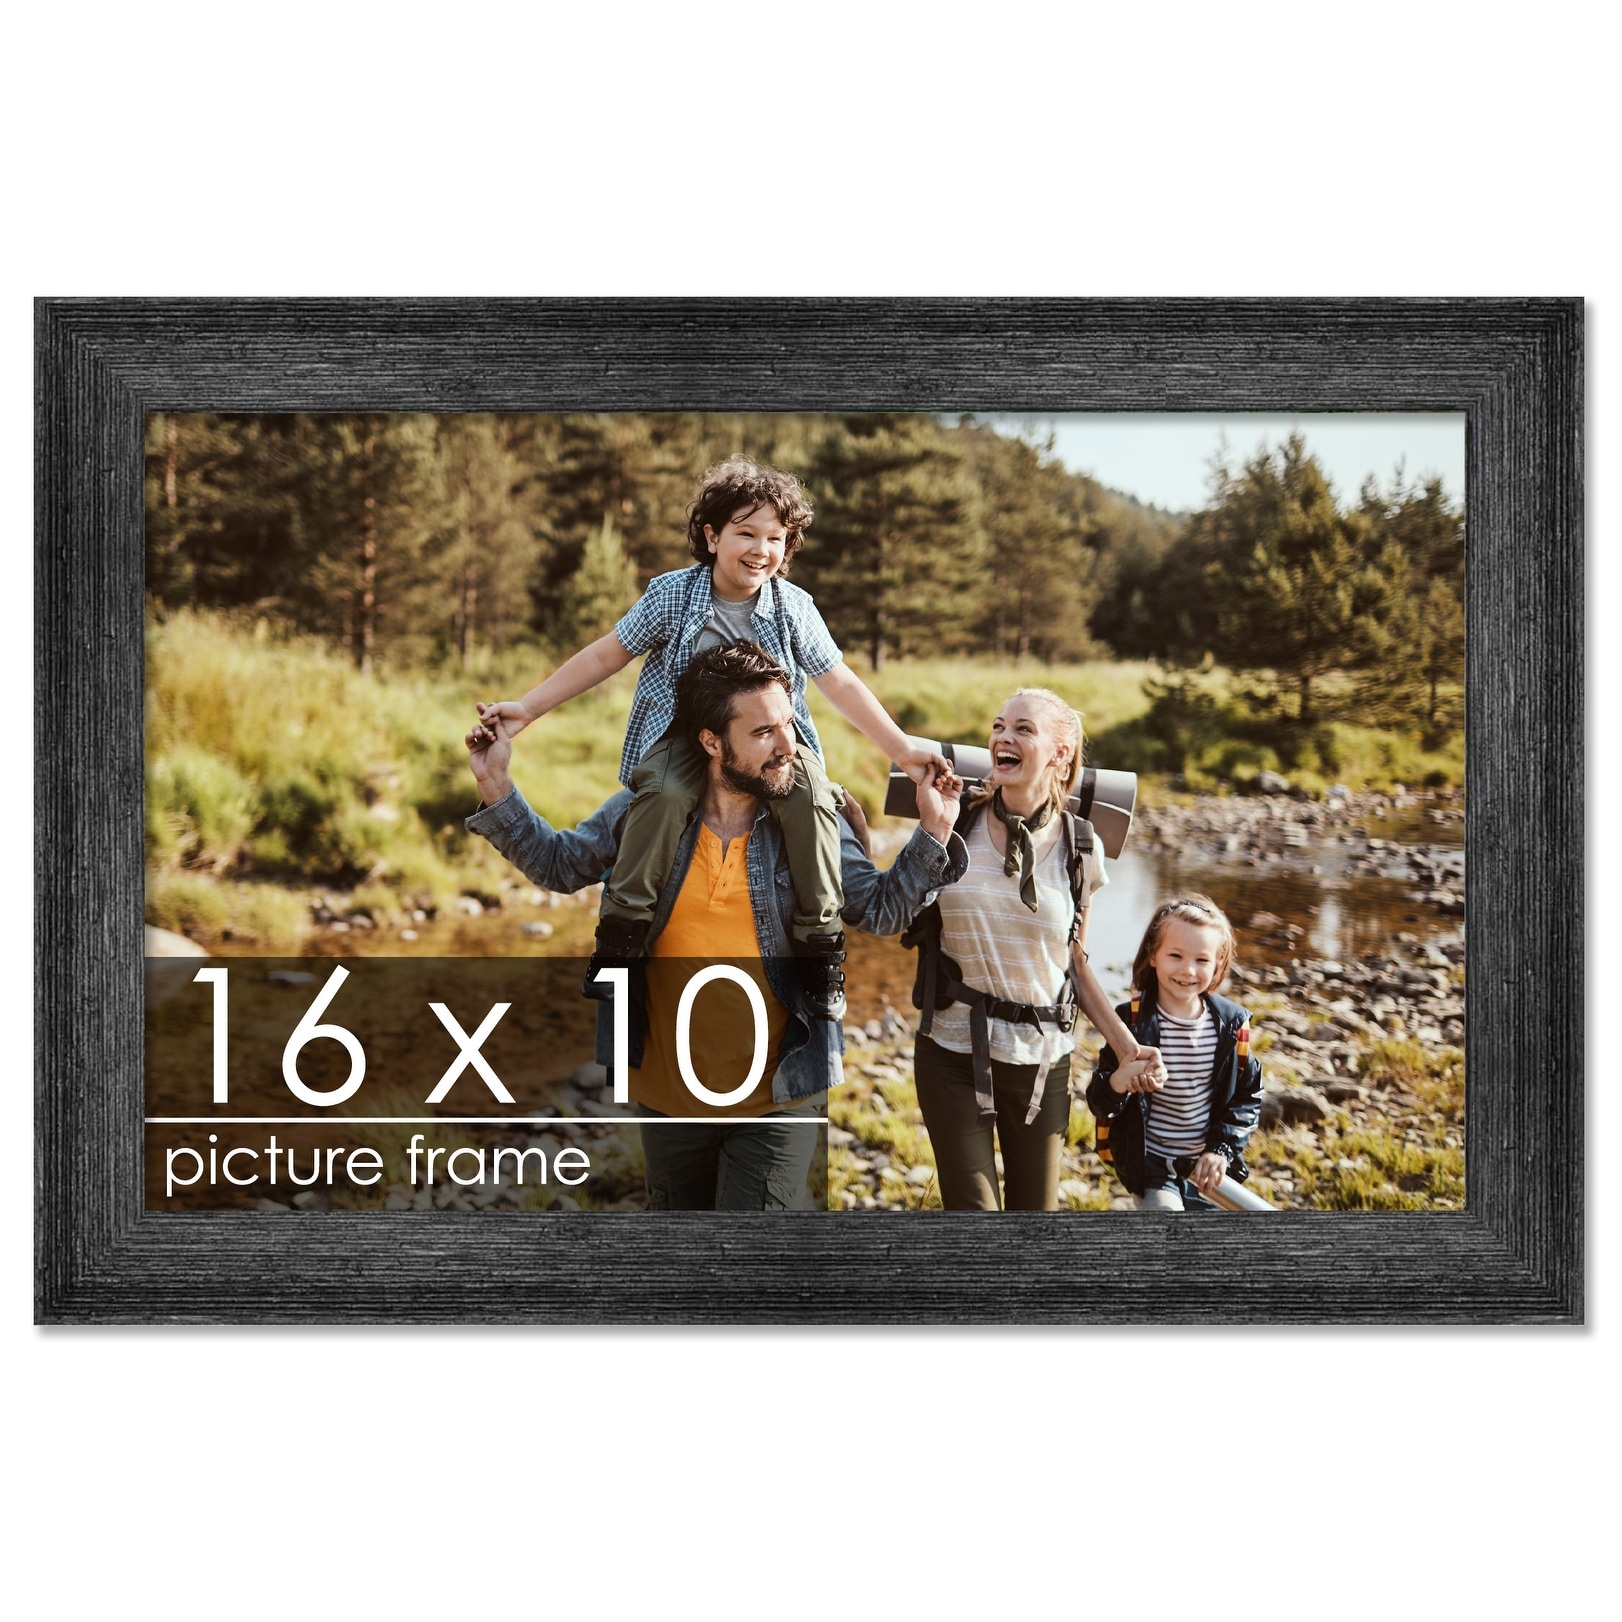 8x8 Picture Frame - Contemporary Picture Frame Complete With UV